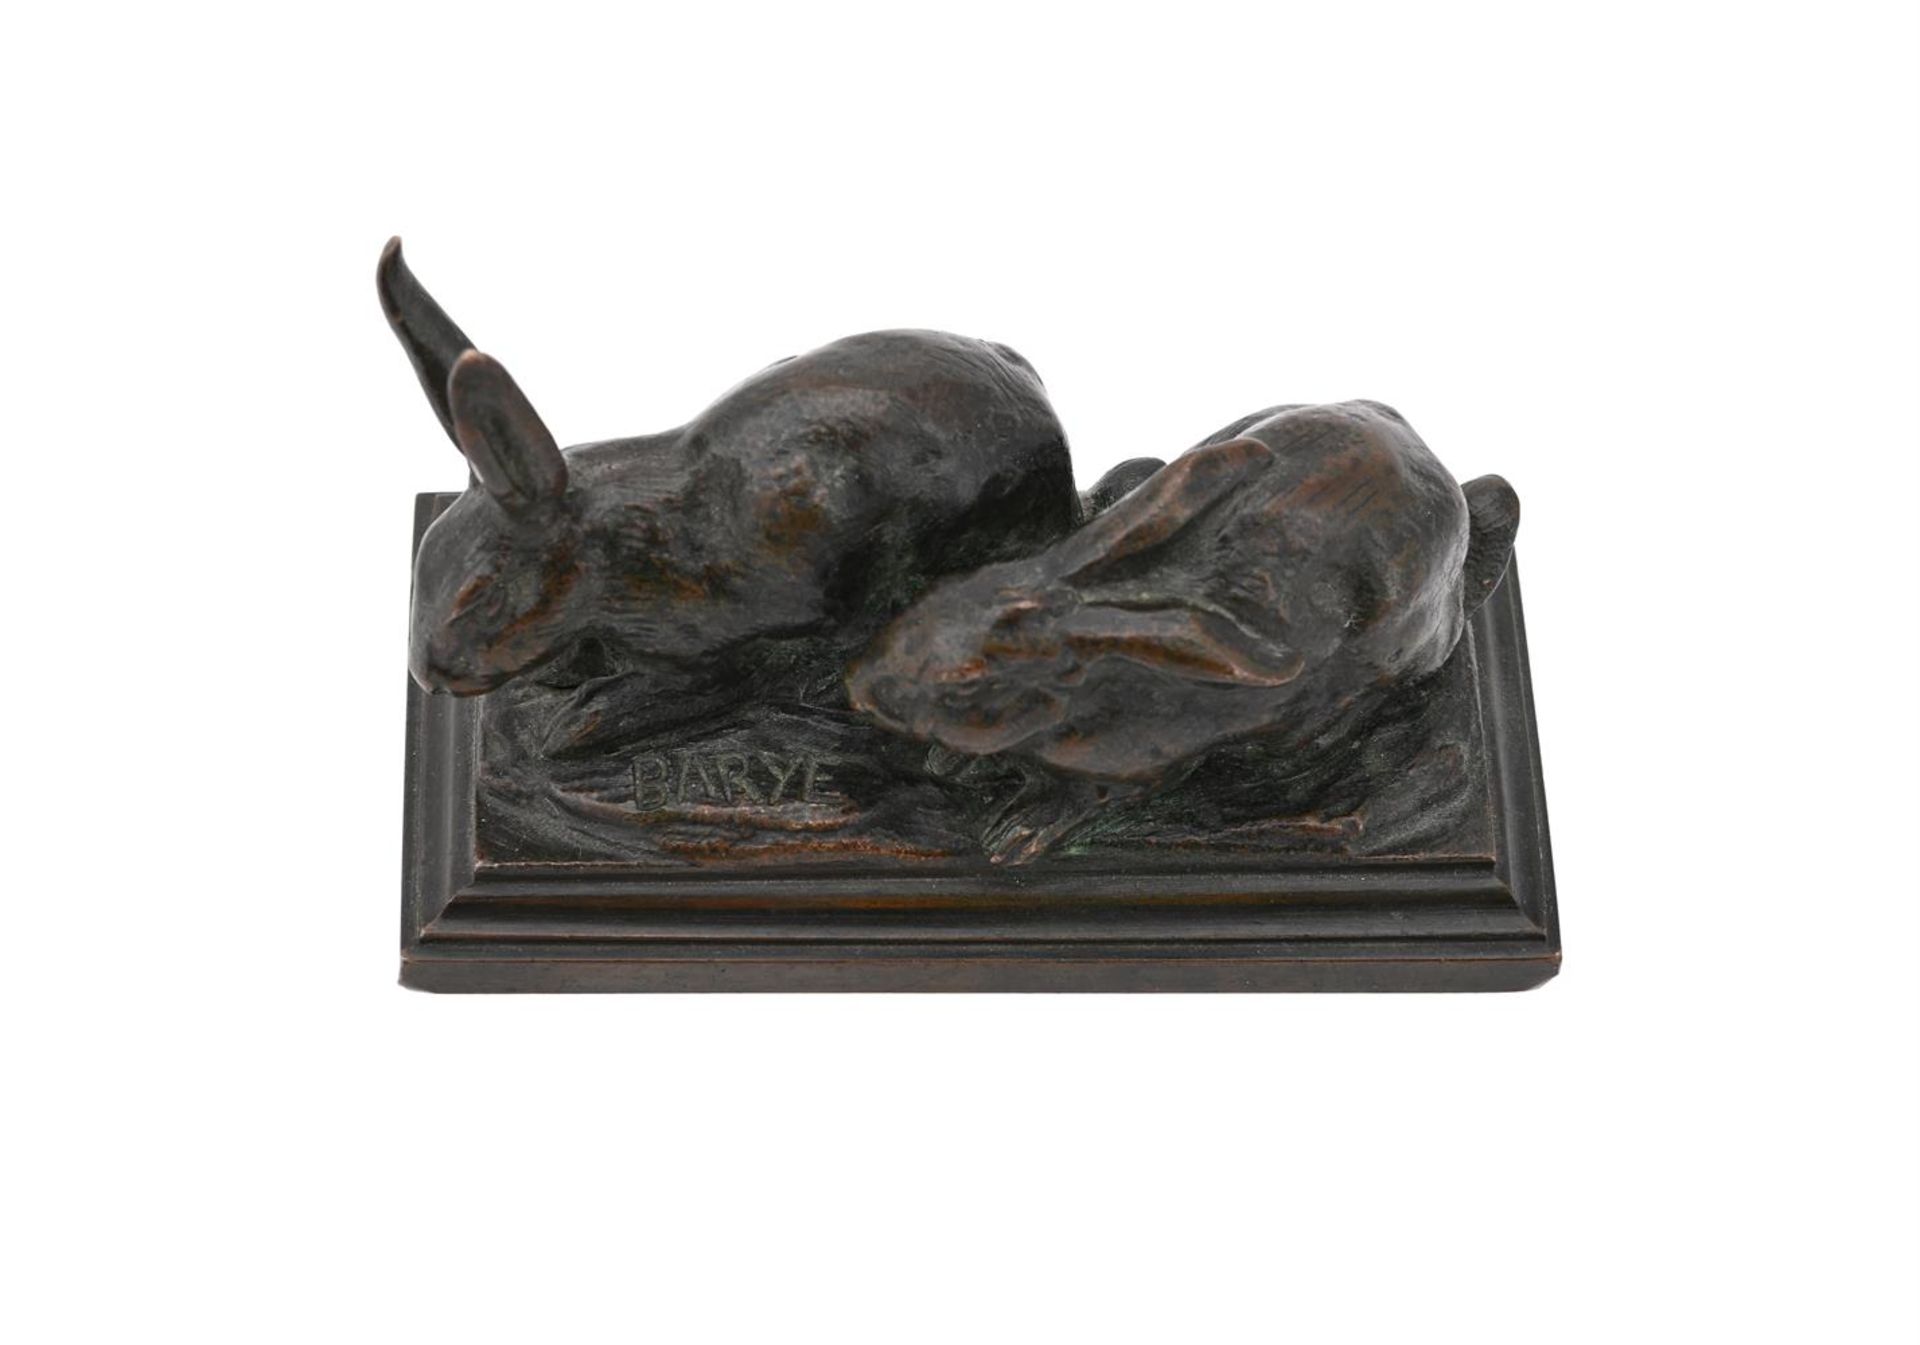 ANTOINE-LOUIS BARYE (FRENCH, 1795-1875), A BRONZE GROUP OF A PAIR OF RABBITS - Image 3 of 5